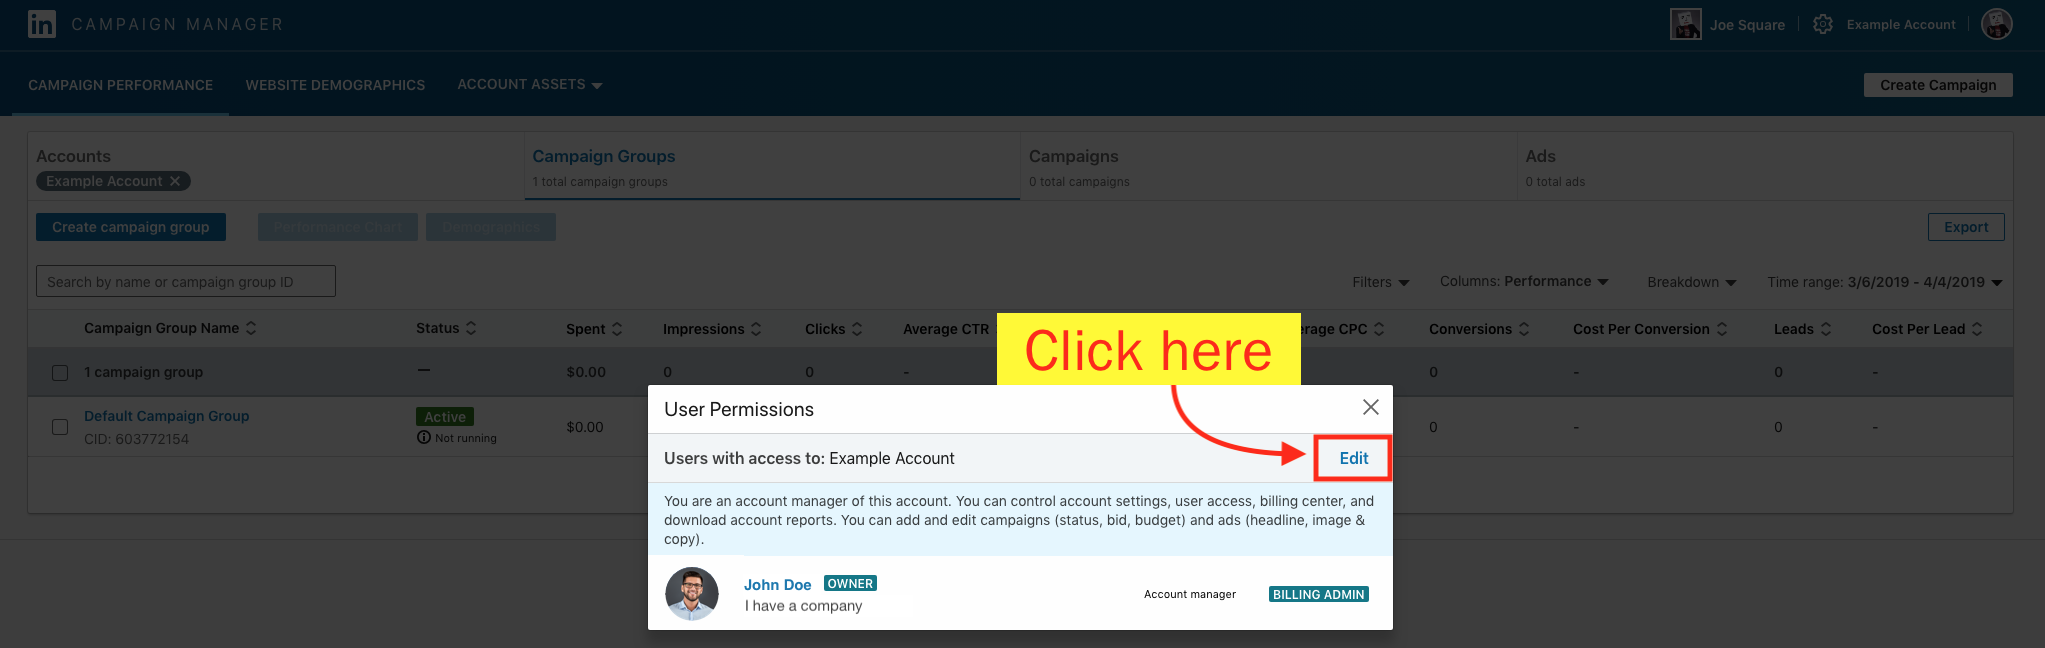 Add a Campaign Manager to Your LinkedIn Ad Account - Step 4 Screenshot